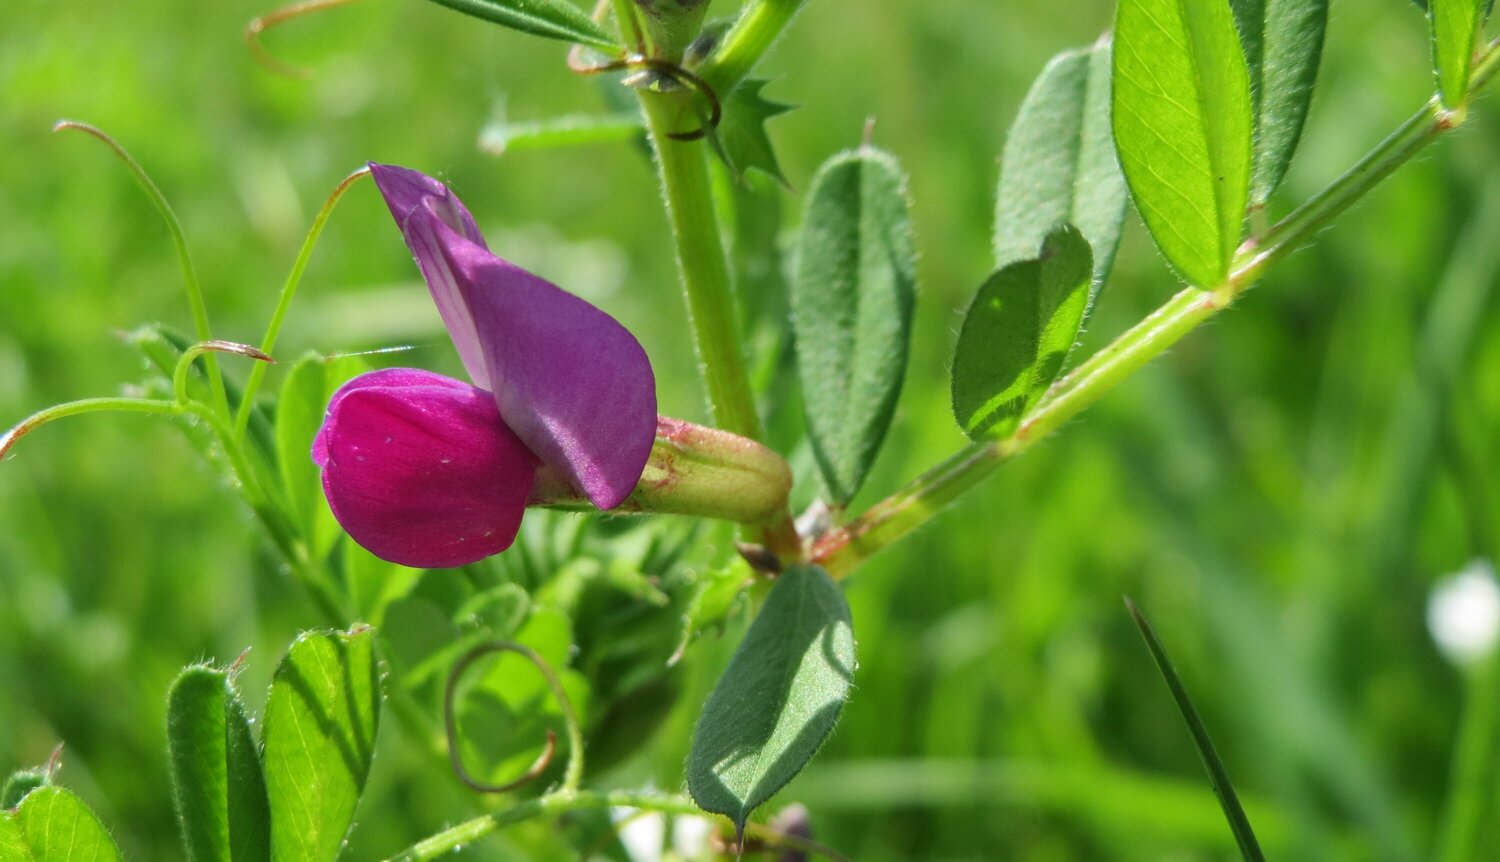 Deposited by both Slovakia and ICARDA, the common vetch plays an important but low-key role in the global food system. A member of the pea family, its ability to produce its own fertilizer makes it useful in rotations, and it also provides palatable forage for livestock. 